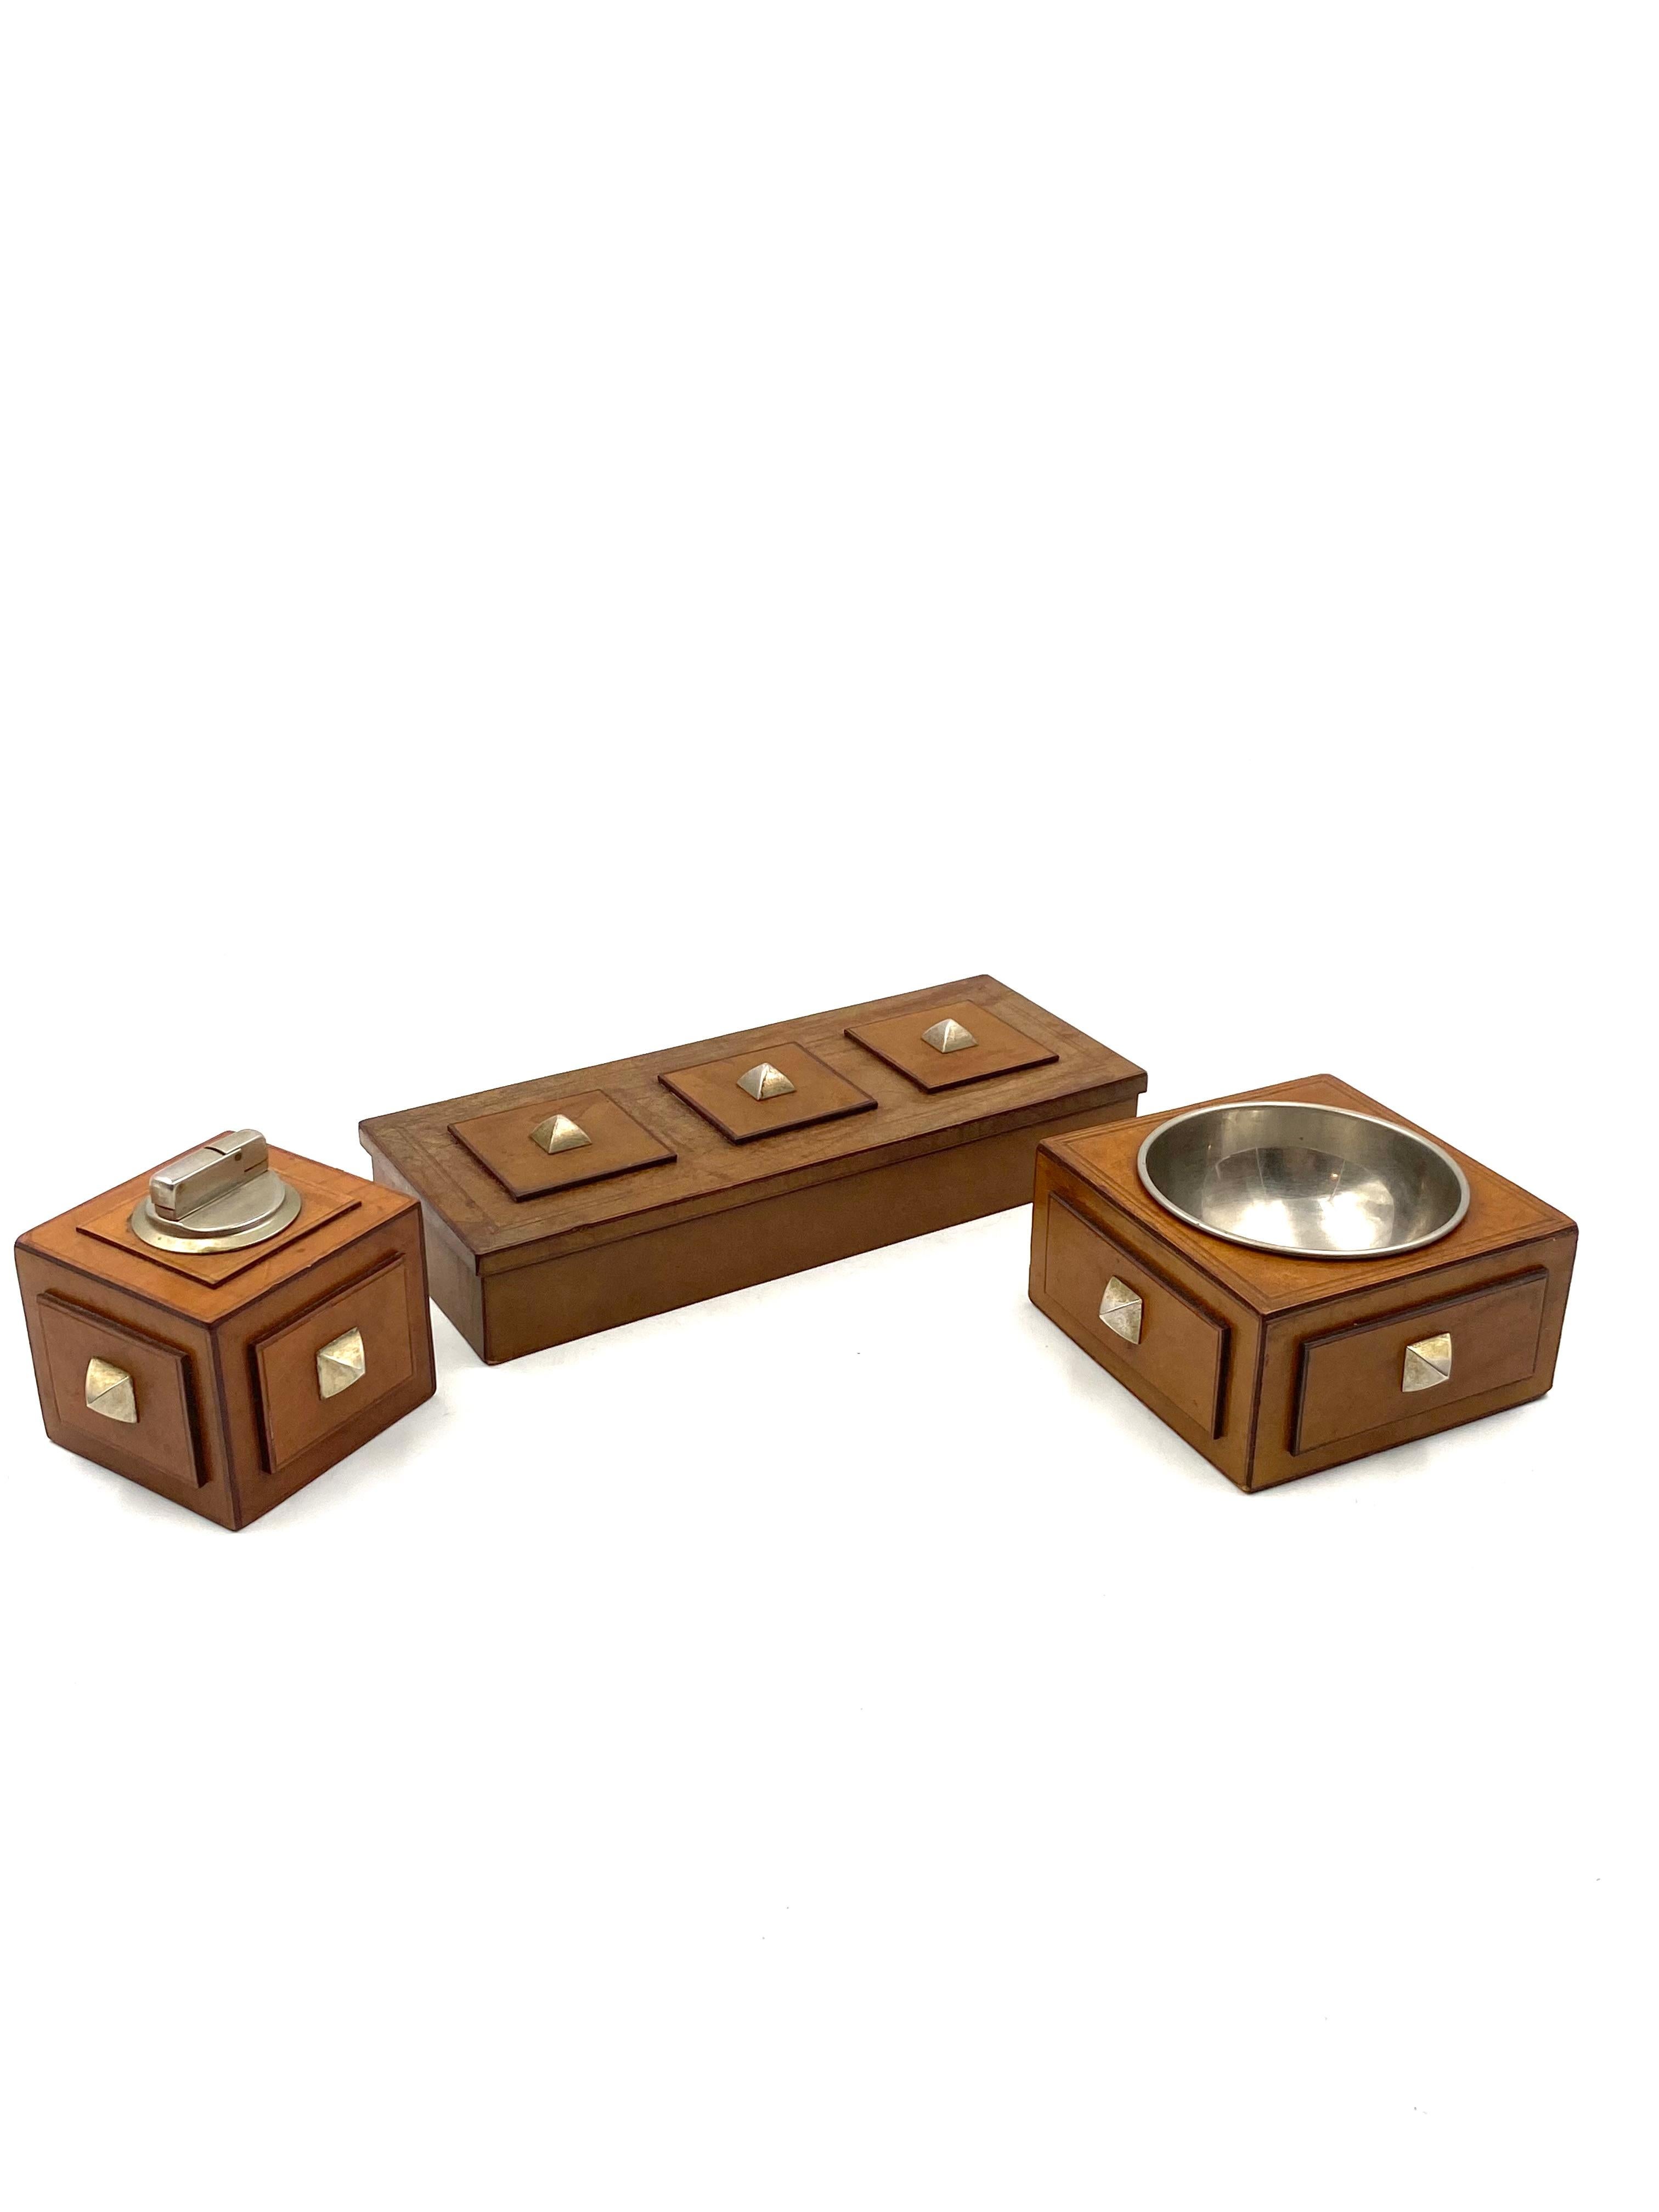 Smoking Set, parchment ashtray, table lighter and cigars box, France 1950s For Sale 4